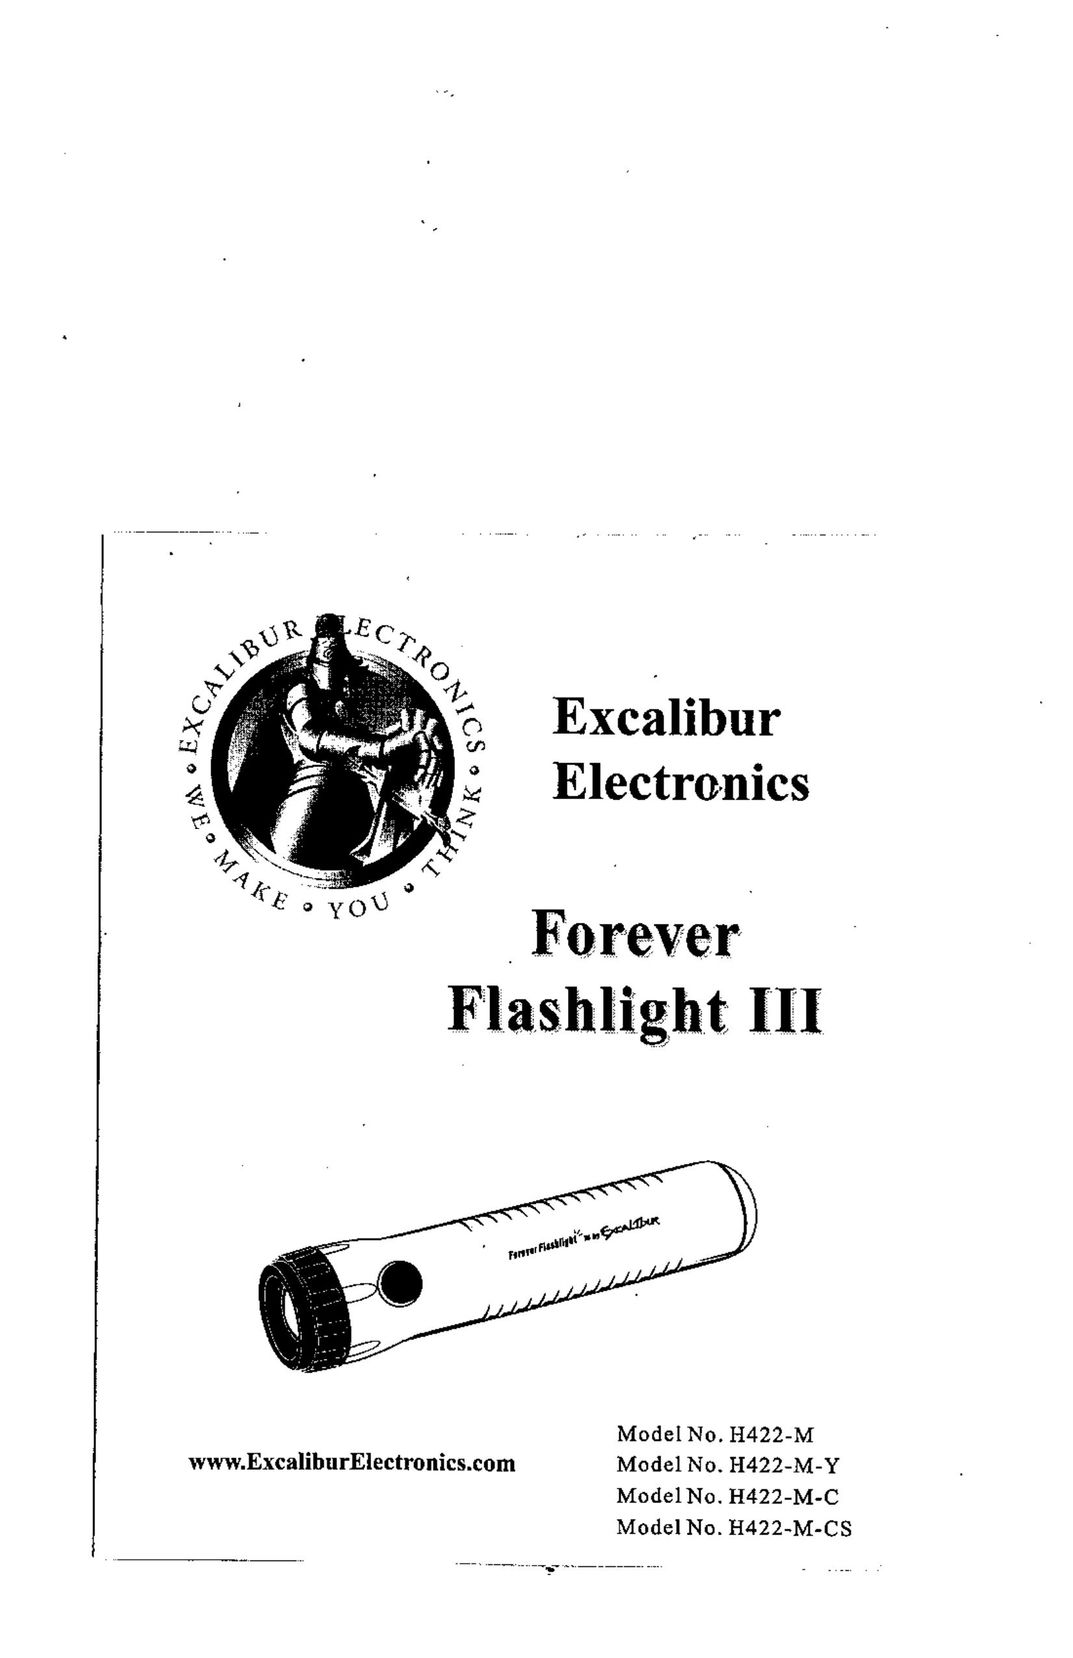 Excalibur electronic H422-M-CS Home Safety Product User Manual